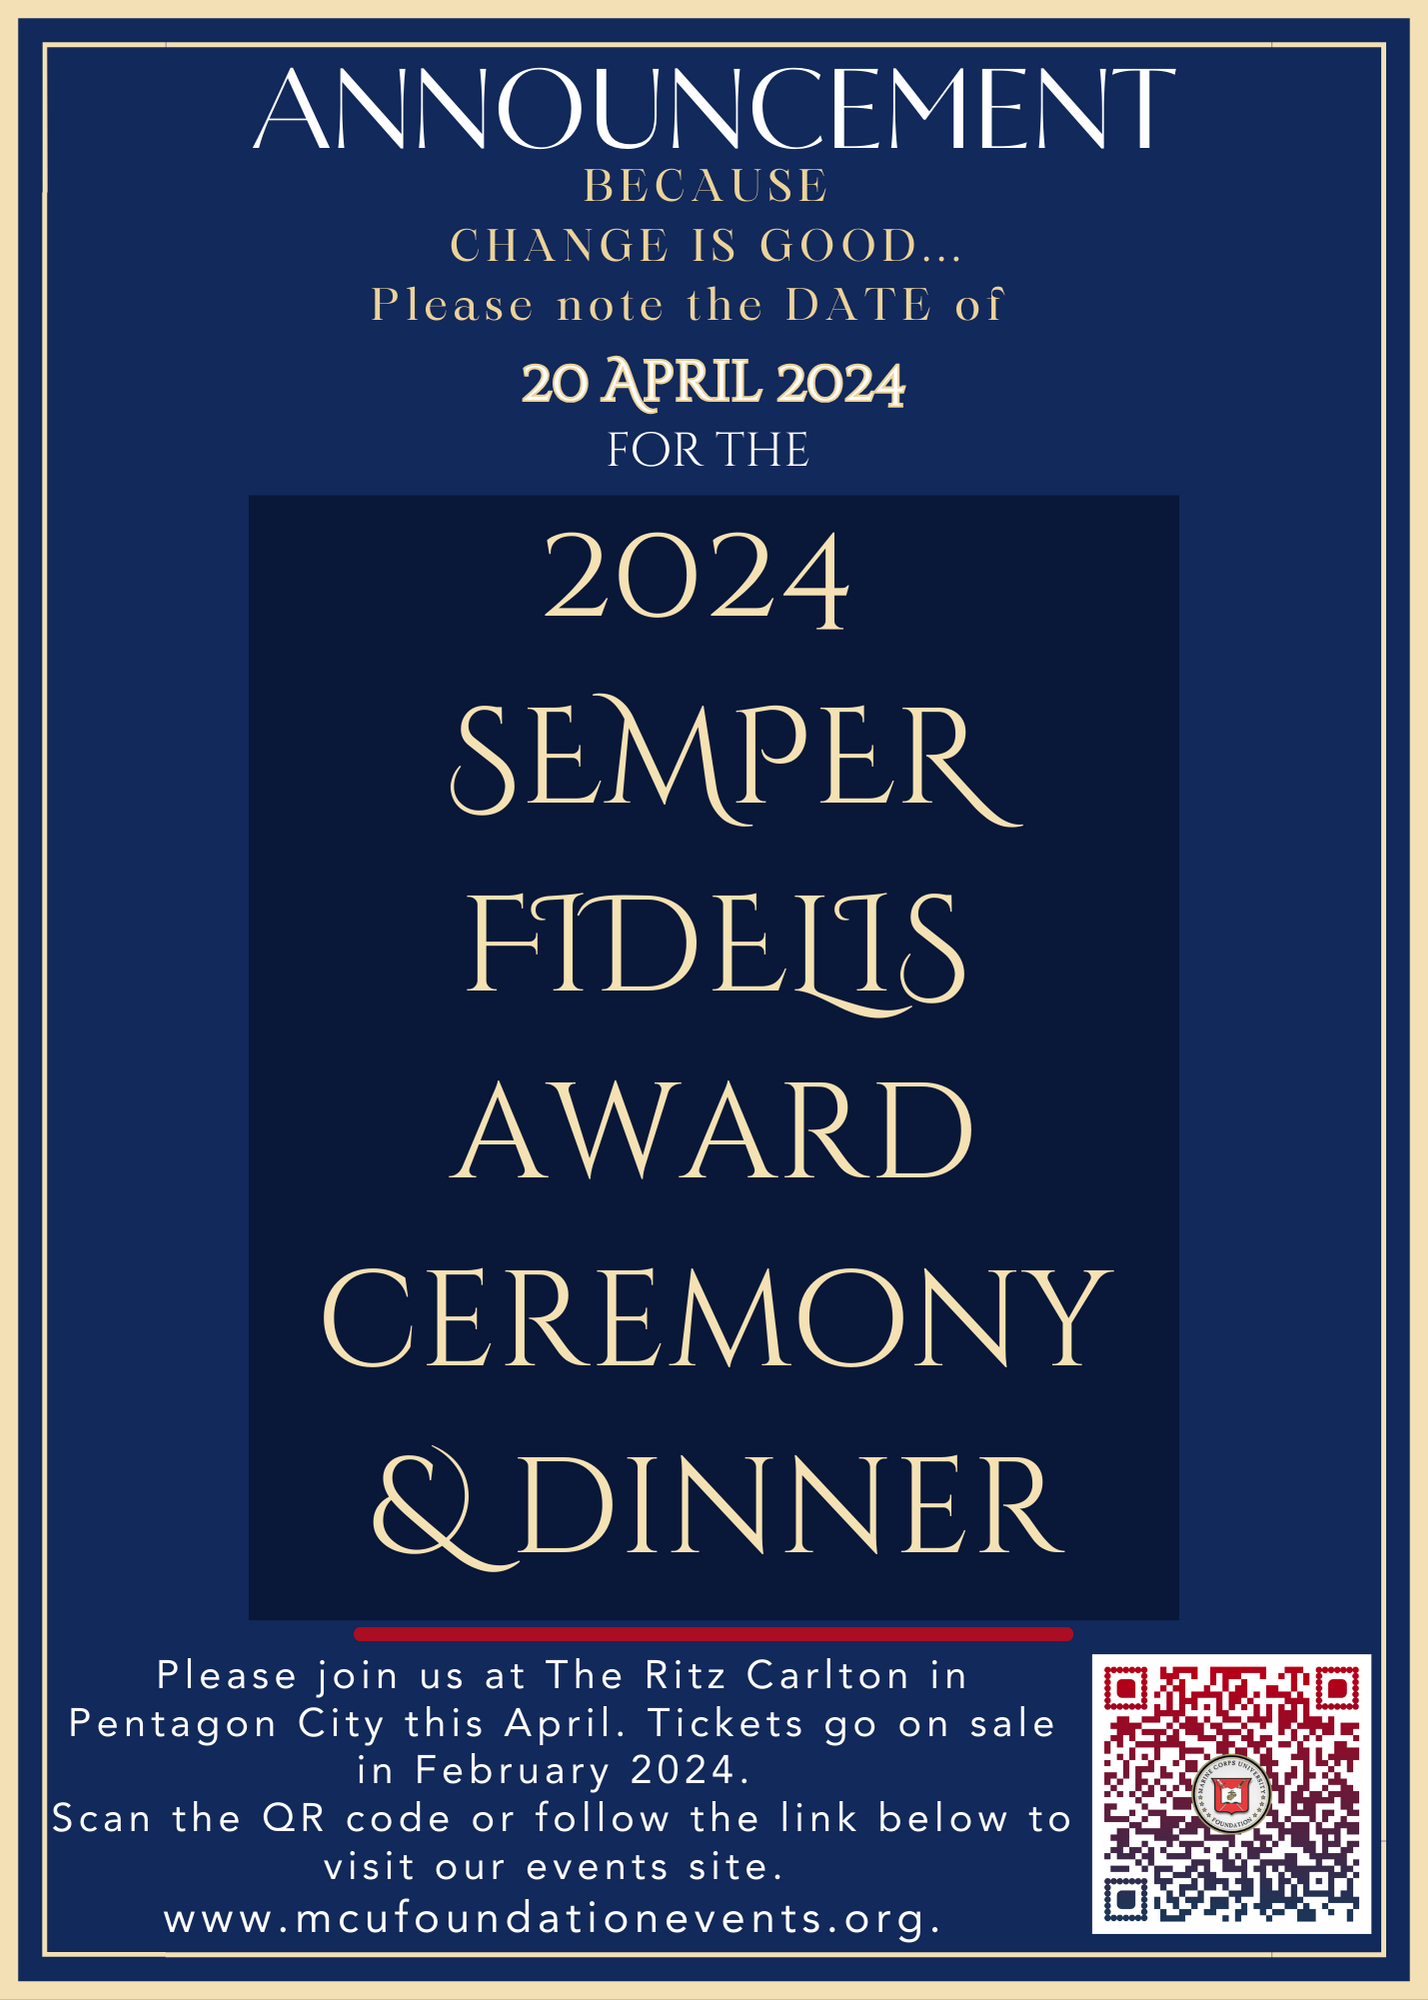 Save the Date! Semper Fidelis Award Dinner to be held April 20, 2024